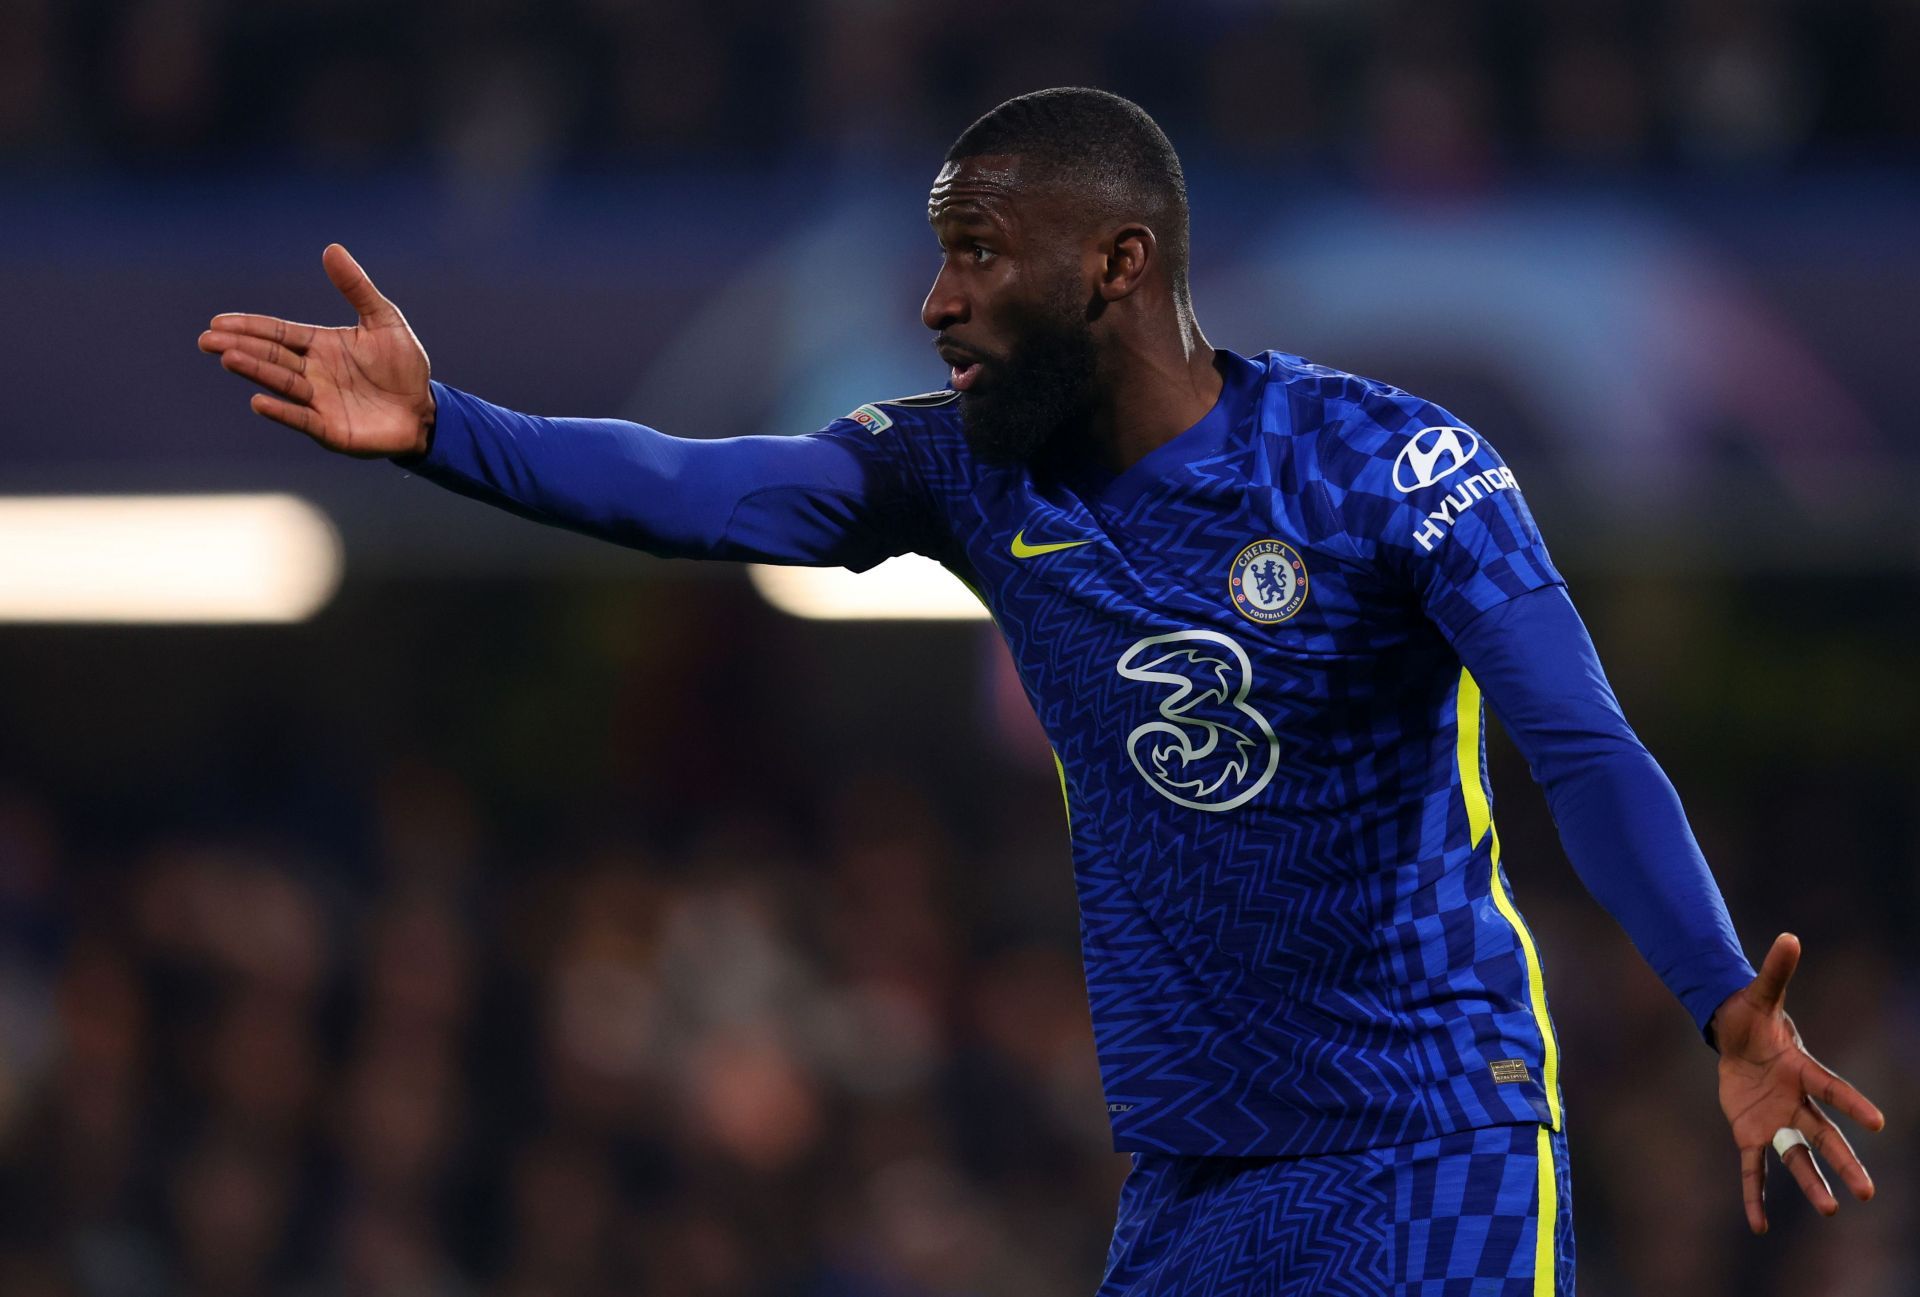 Rudiger has been in good form for his team